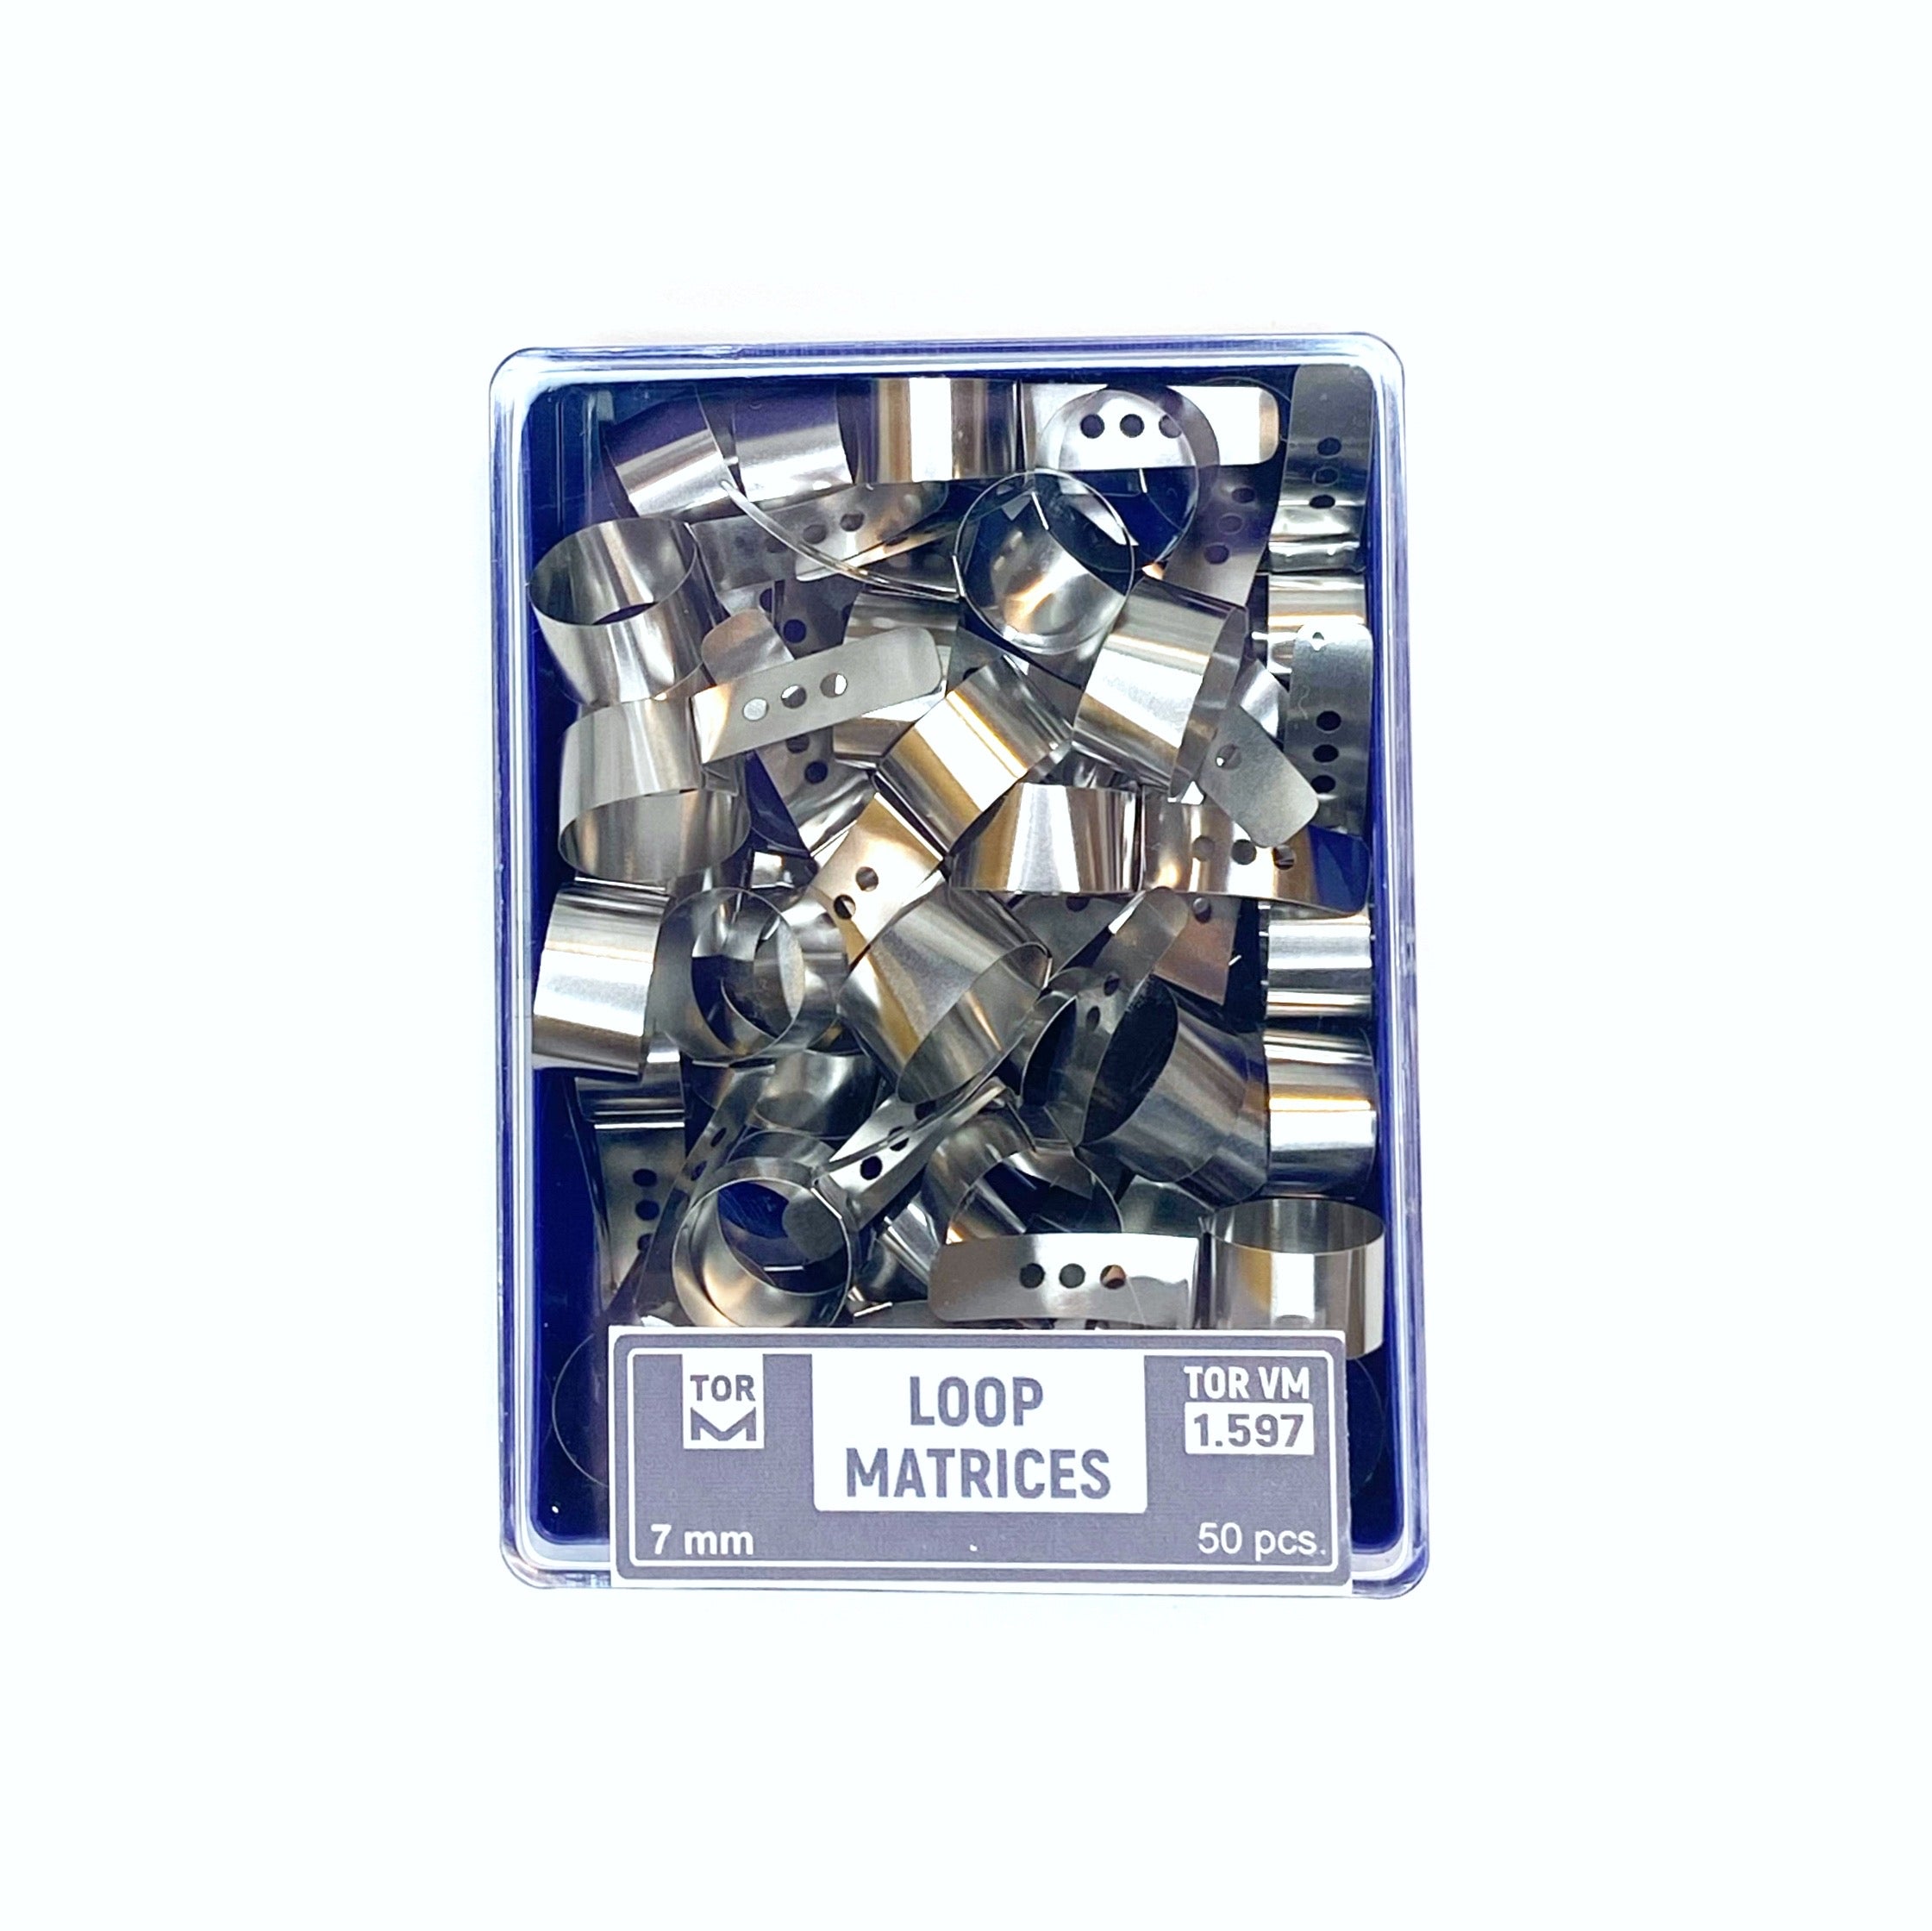 loop-matrices-height-7-mm-50pcs